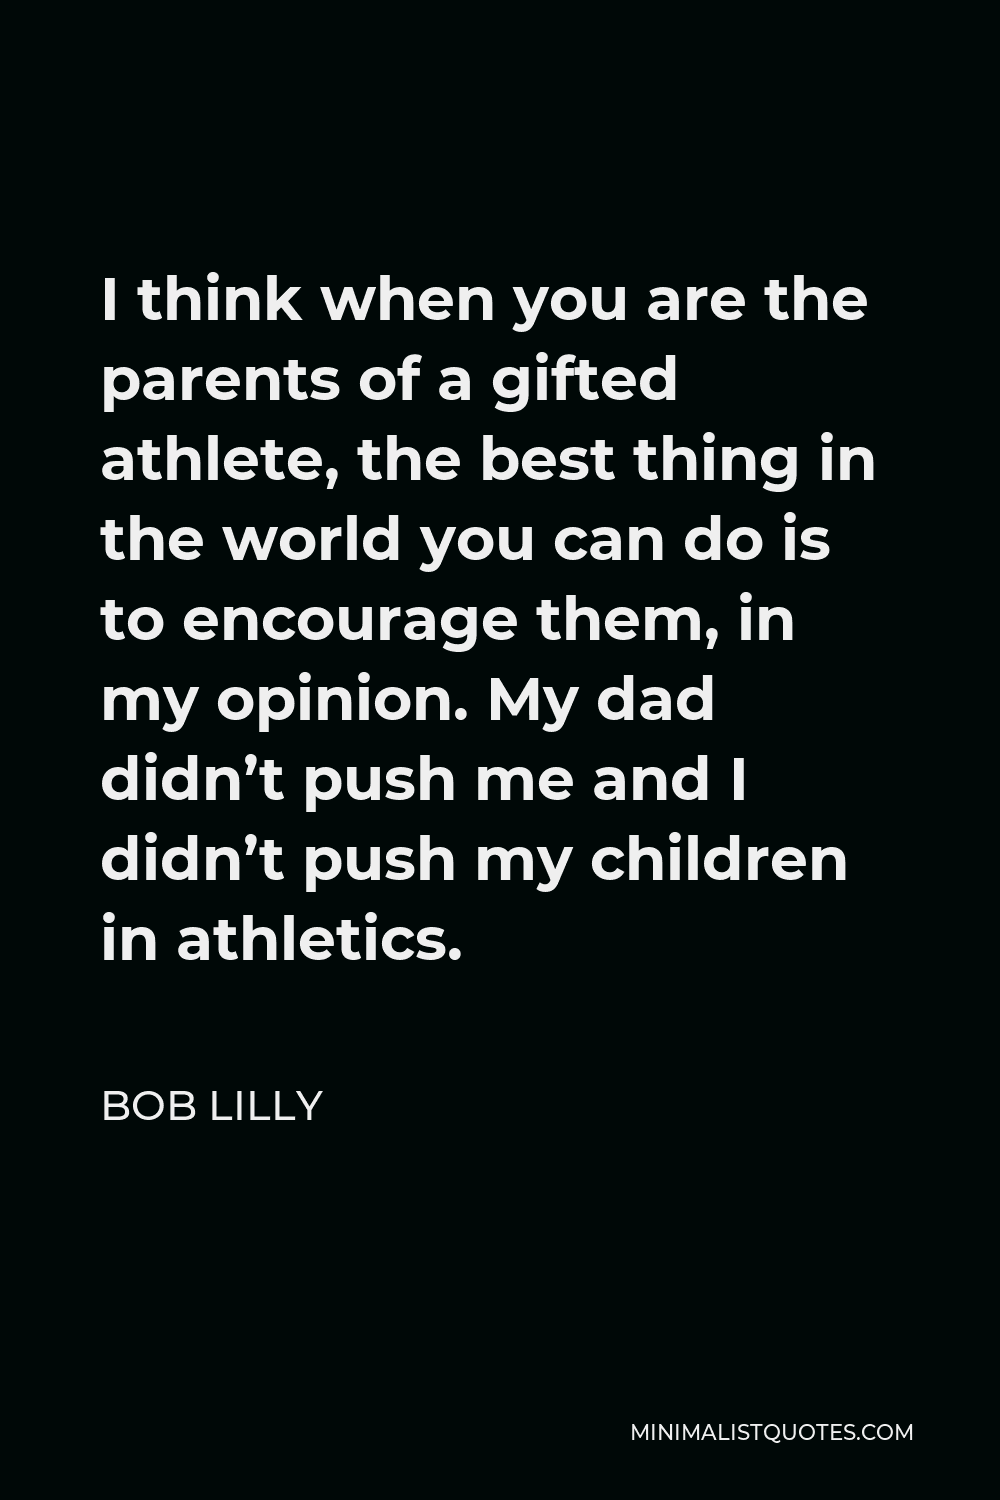 Bob Lilly Quote - I think when you are the parents of a gifted athlete, the best thing in the world you can do is to encourage them, in my opinion. My dad didn’t push me and I didn’t push my children in athletics.